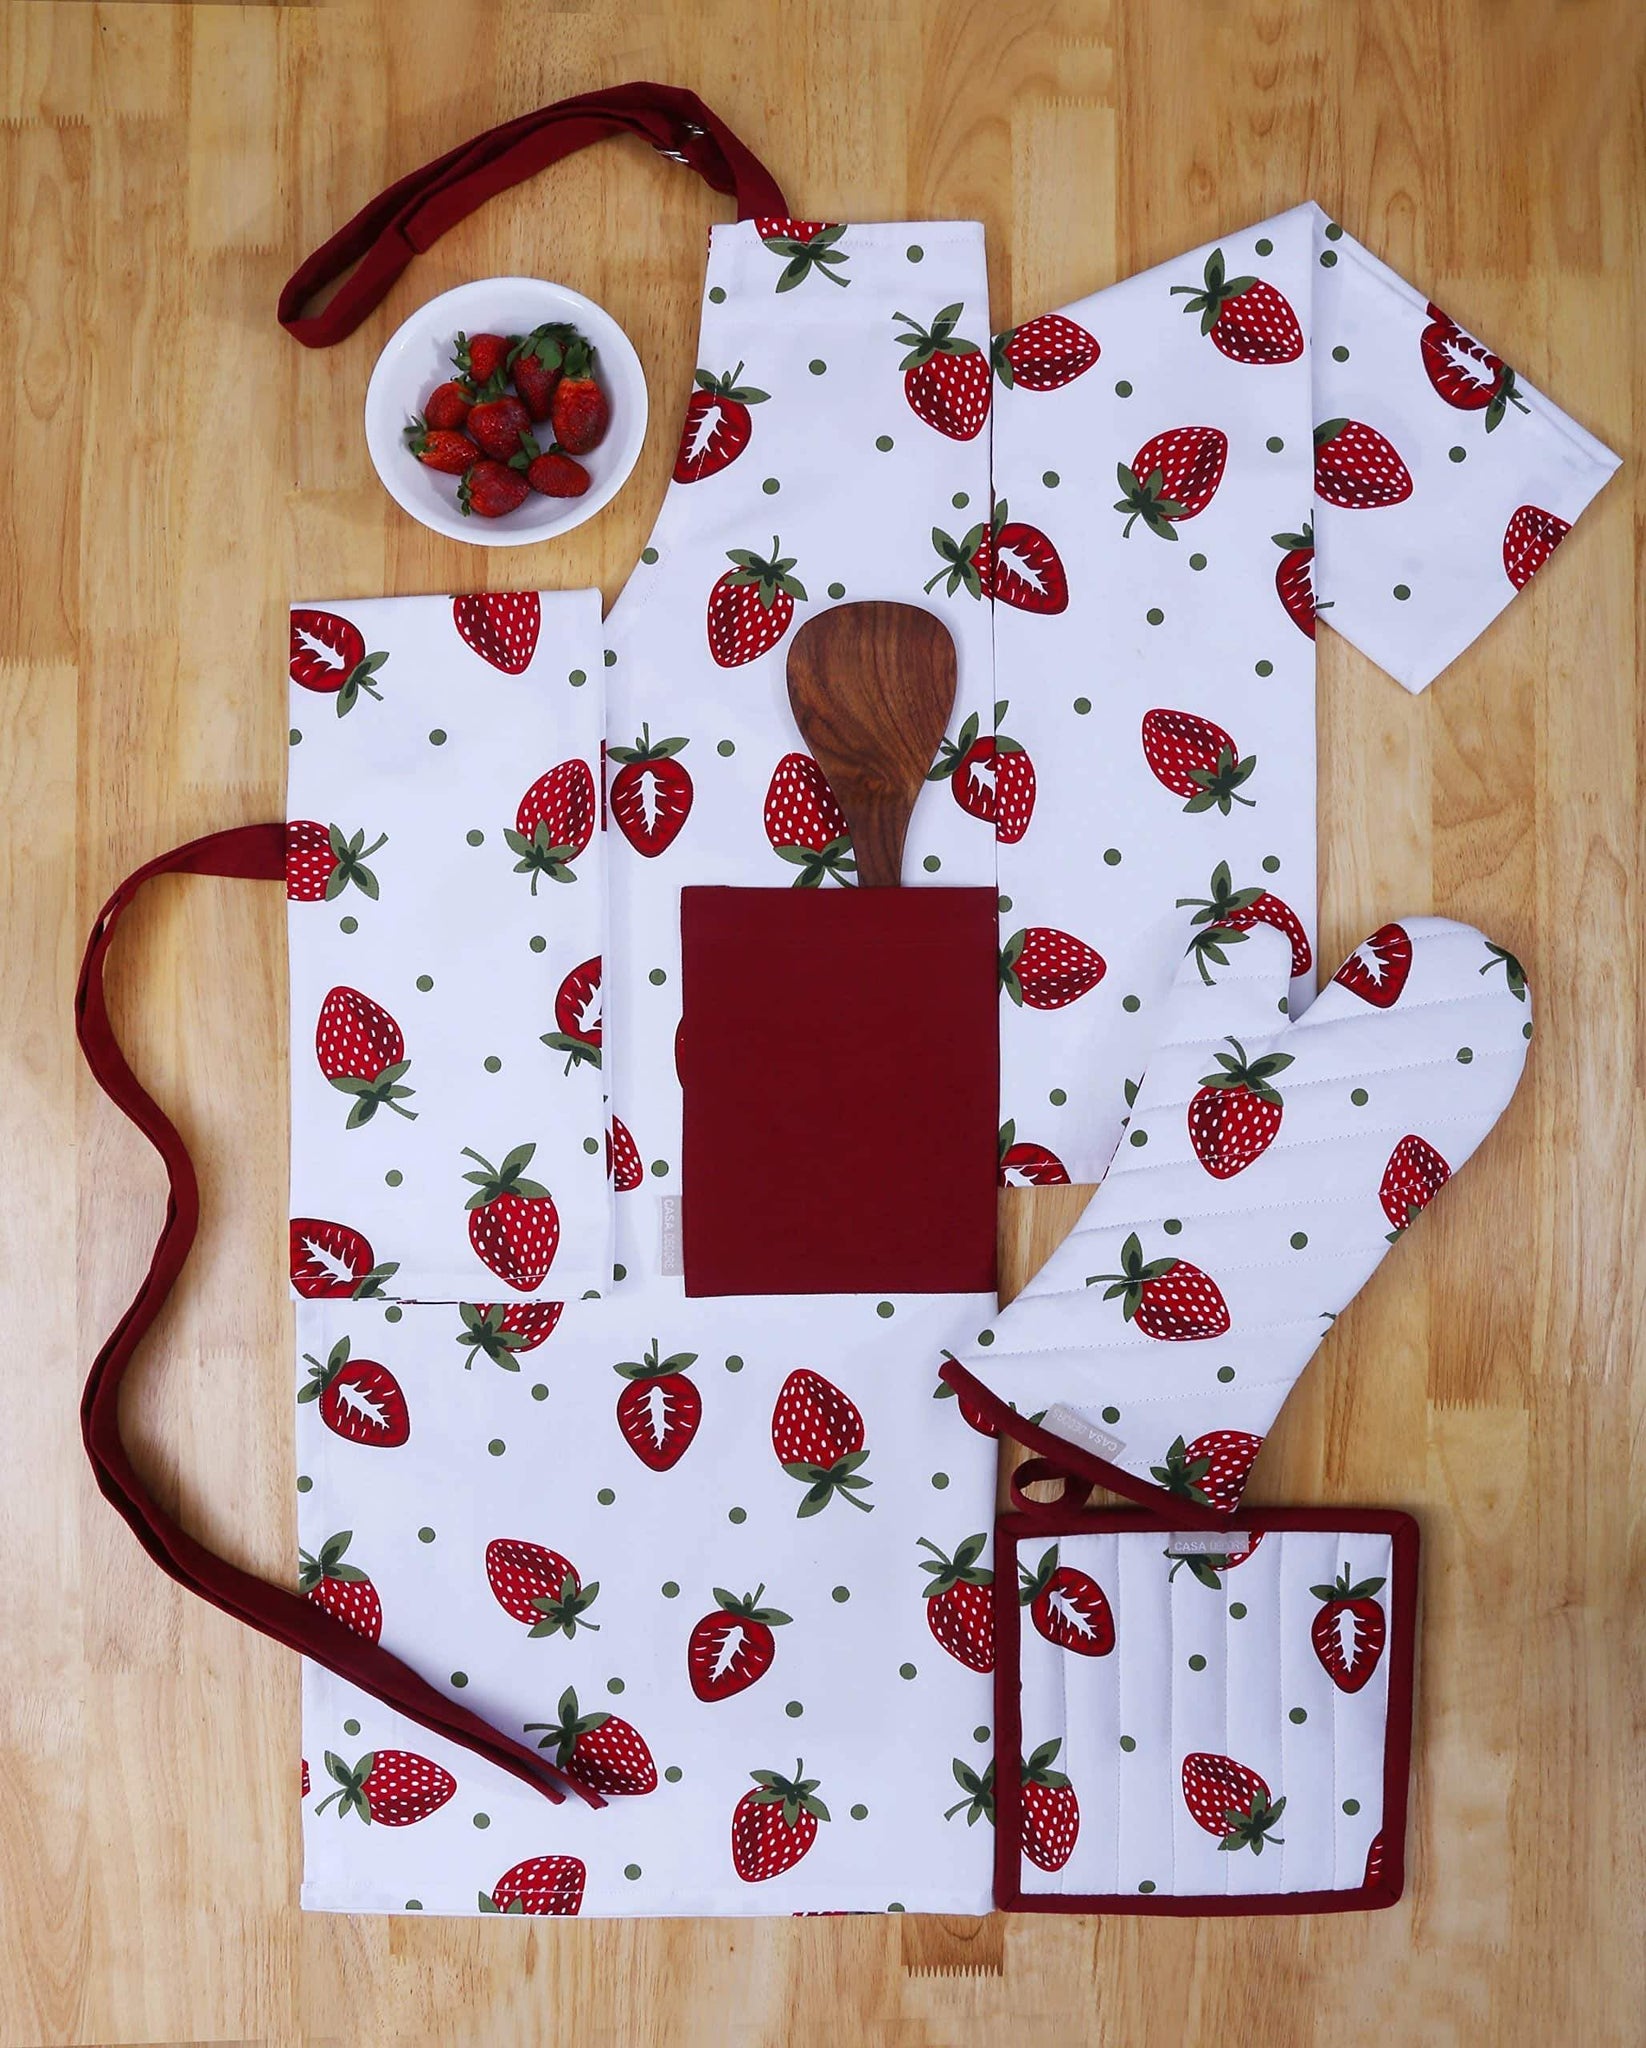 CASA DECORS Set of Apron, Oven Mitt, Pot Holder, Pair of Kitchen Towels in a Unique Berry Blast Design, Made of 100% Cotton, Eco-Friendly & Safe, Value Pack and Ideal Gift Set, Kitchen Linen Set